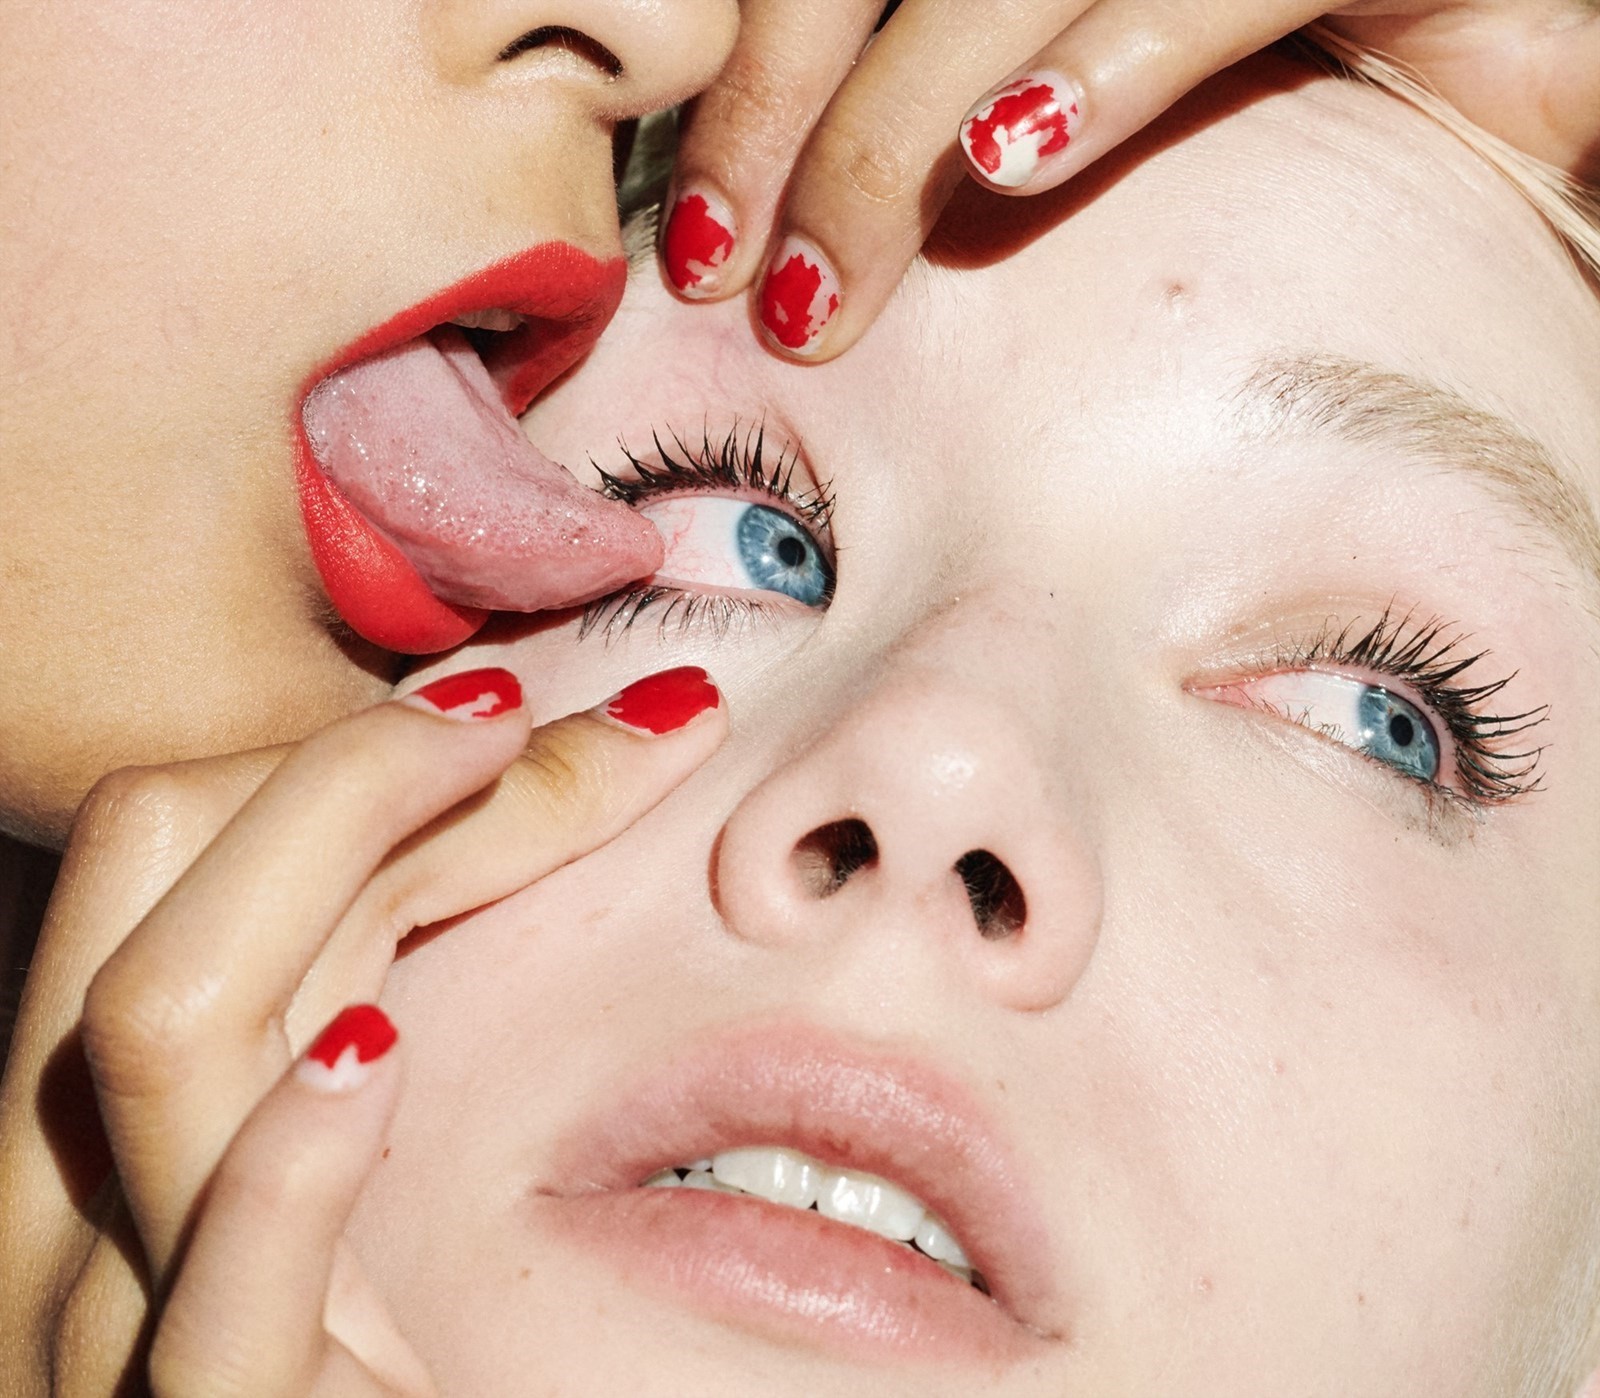 We speak to the people who get off on licking eye balls Dazed image